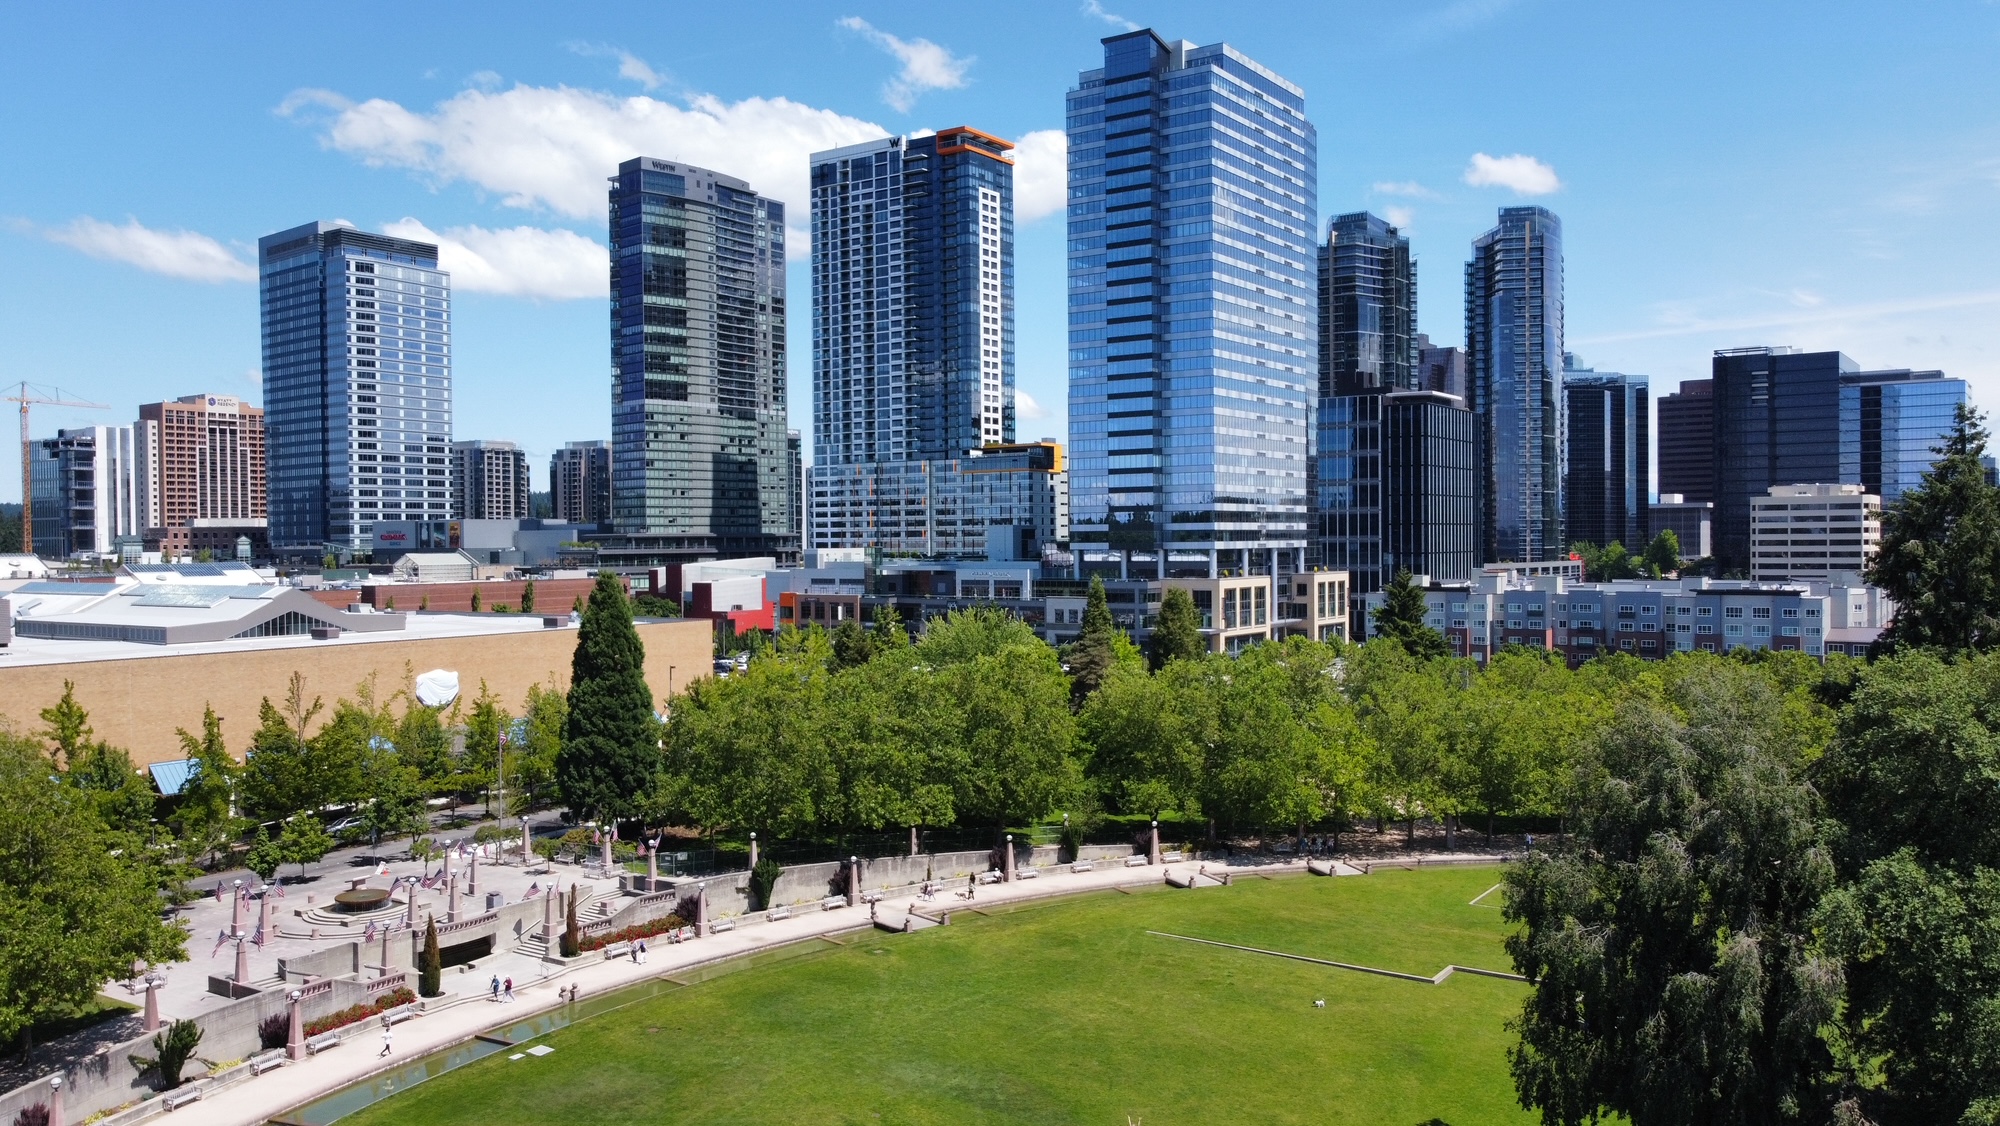 Vacant Commercial Space Decreases in Bellevue Business District As Move-Ins Take Place through 2022